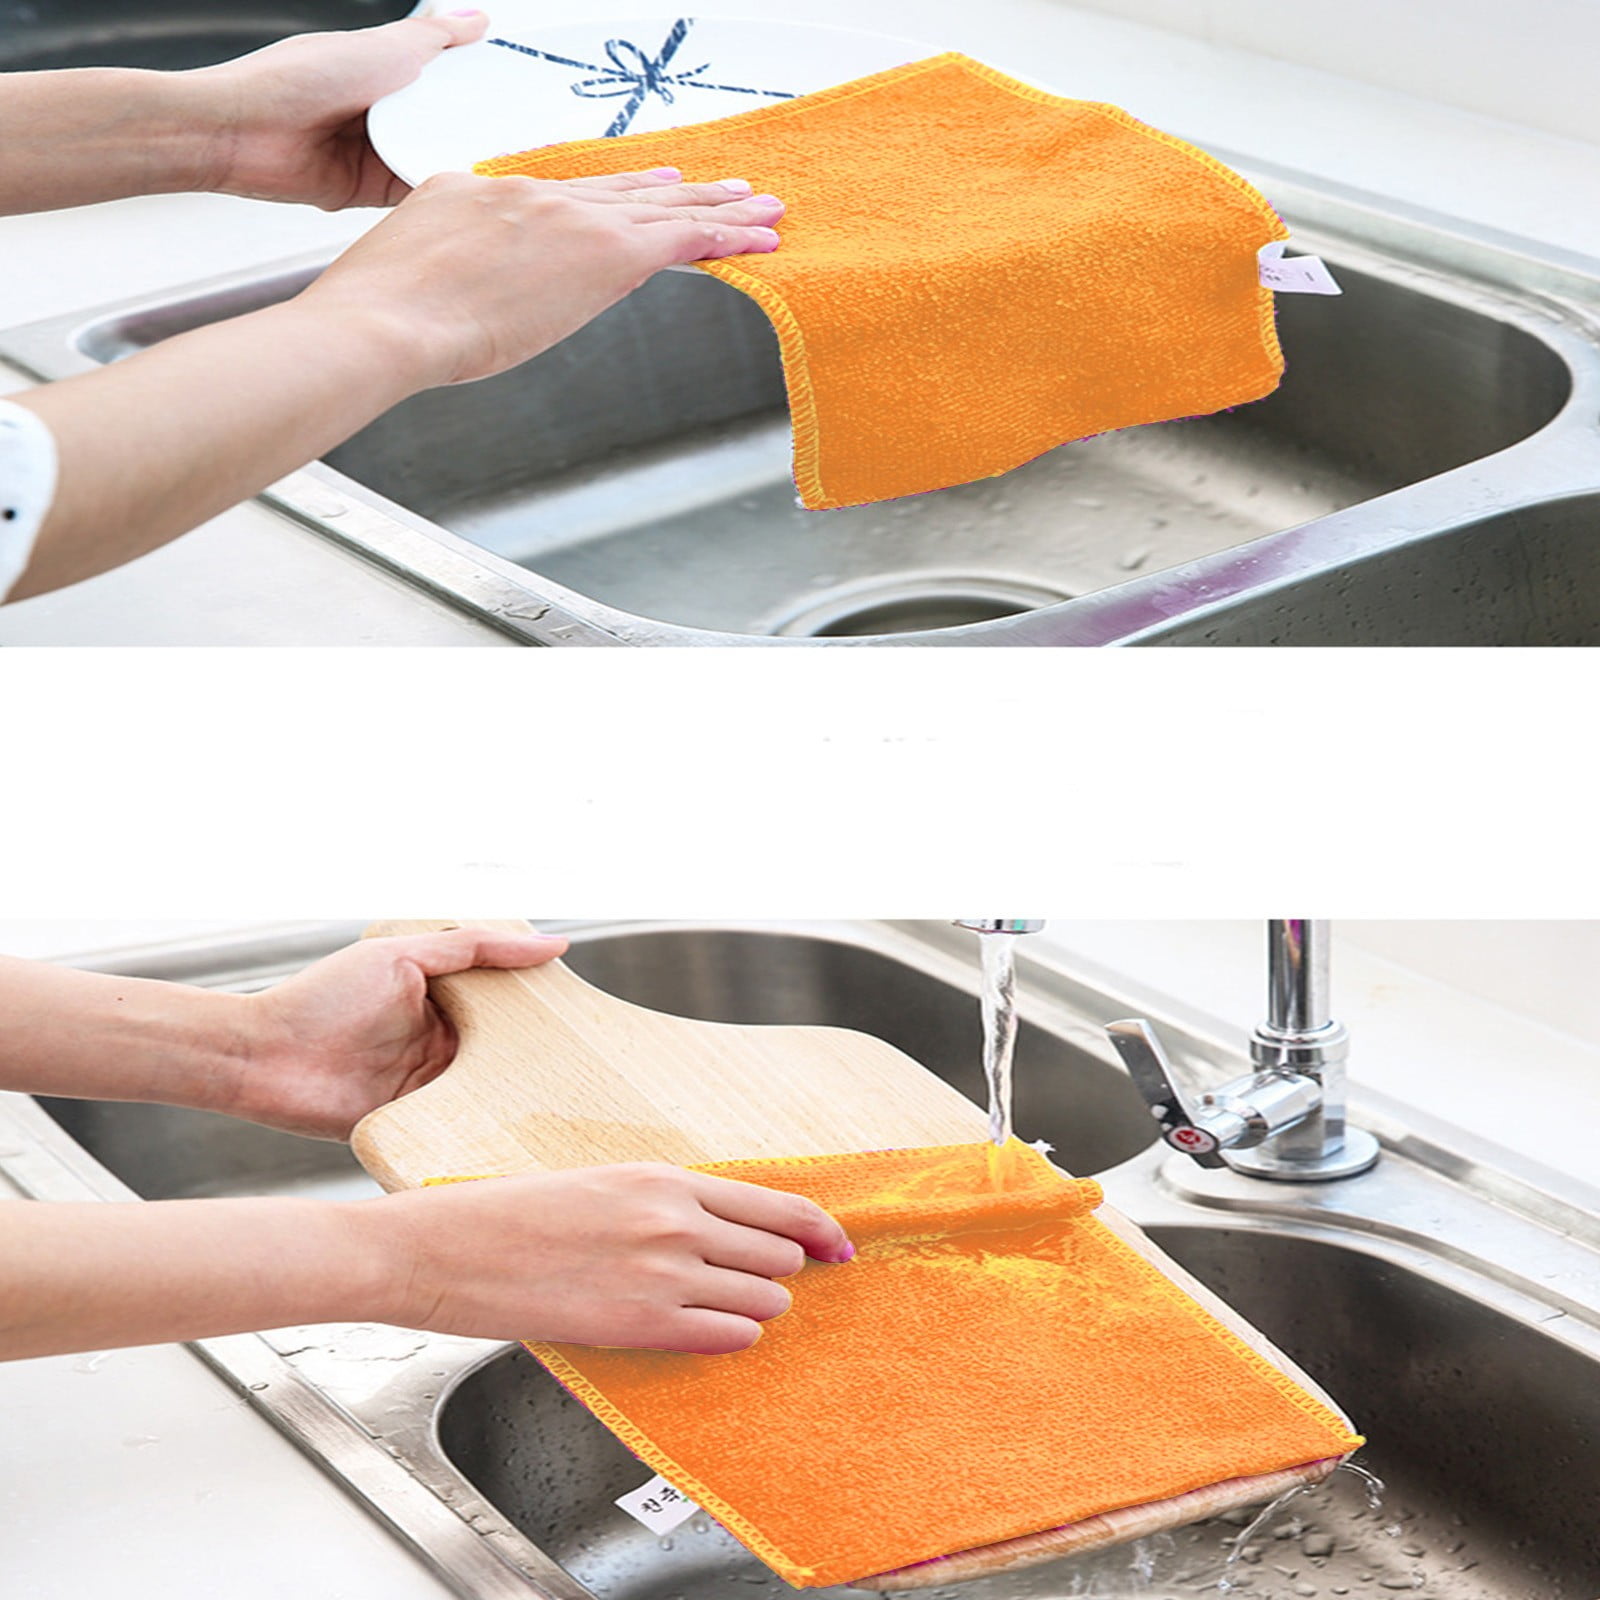 Details about   Household Microfiber Towel Super Absorbent Kitchen Cleaning Cloth 12X12" 12 Pack 